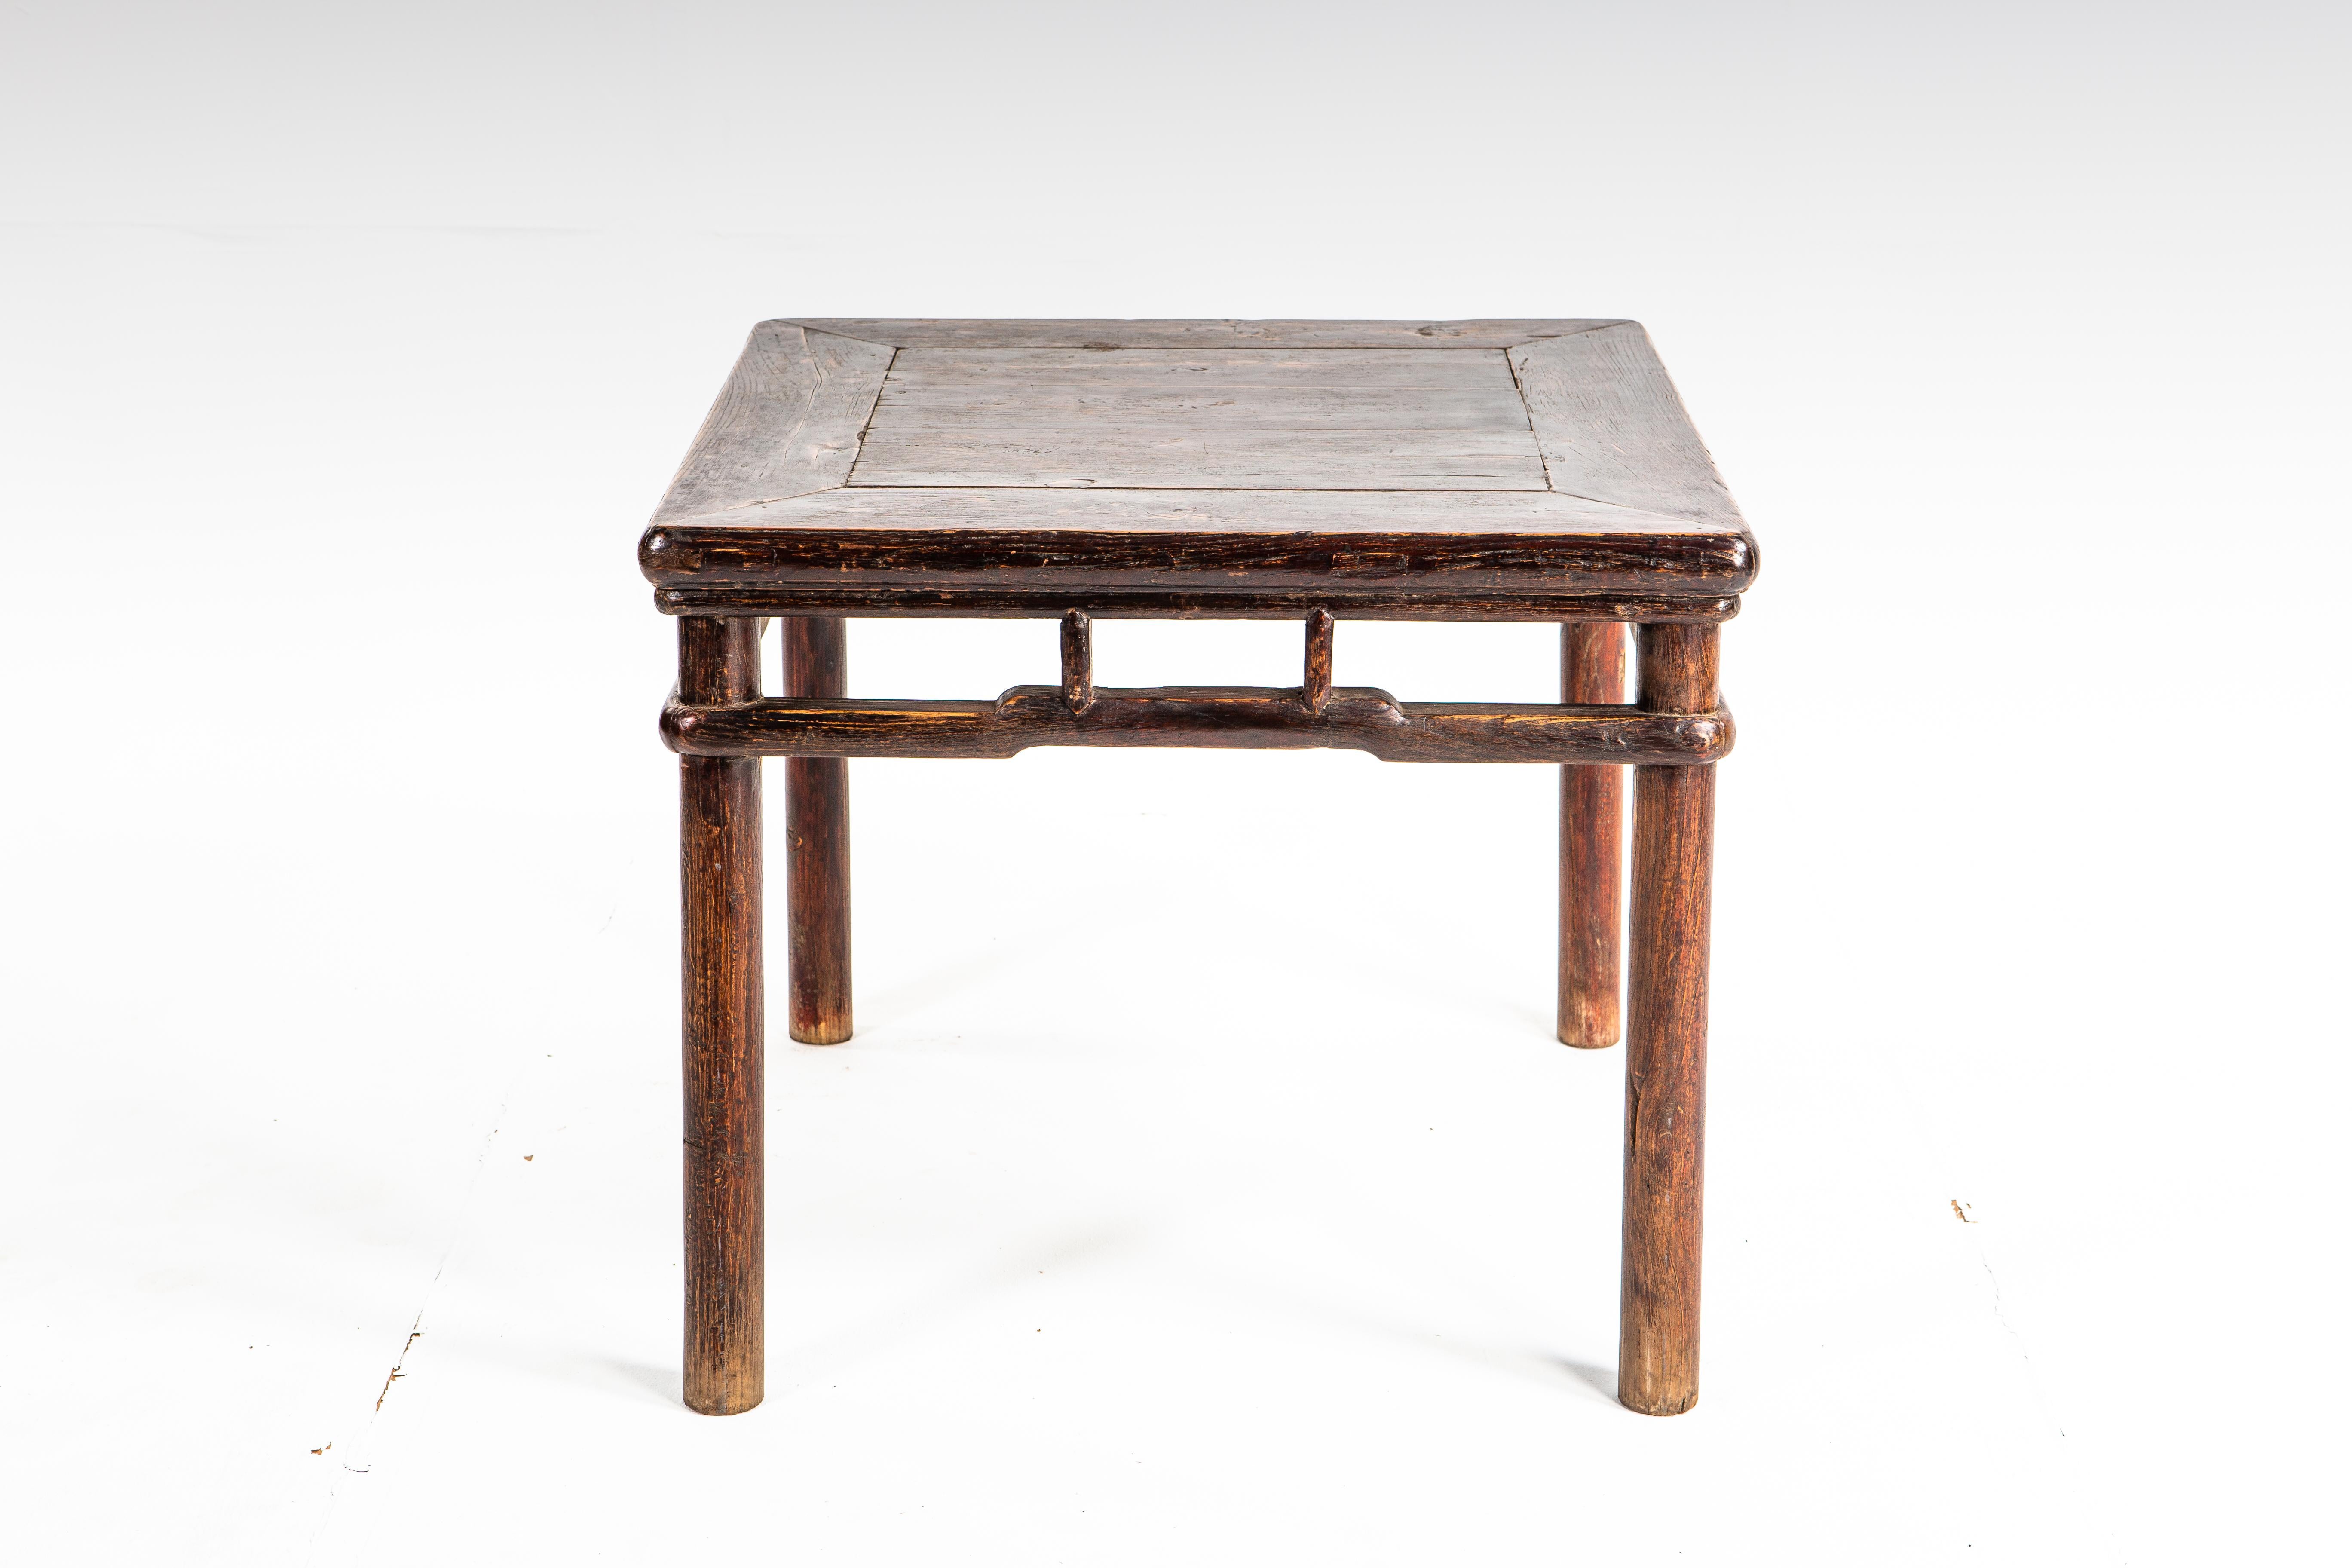 This small side table dates to the middle-Qing dynasty. The piece is made of elm wood and features humpback stretchers and a beautifully aged patina.